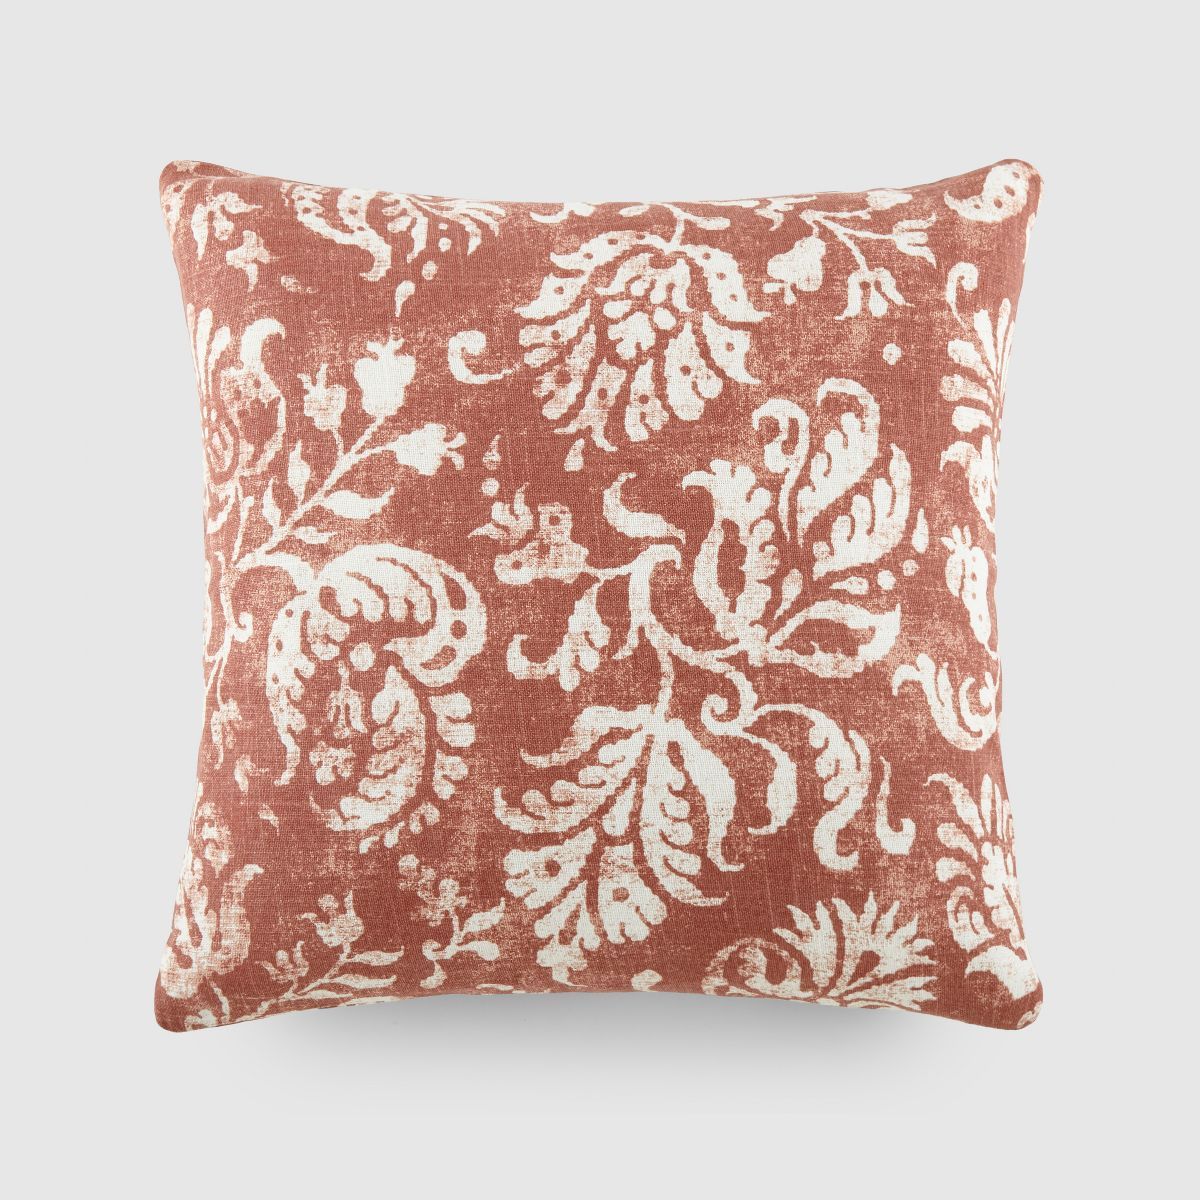 Distressed Floral Pattern Gray Cotton Throw Pillow Cover With Pillow Insert Set - Becky Cameron | Target